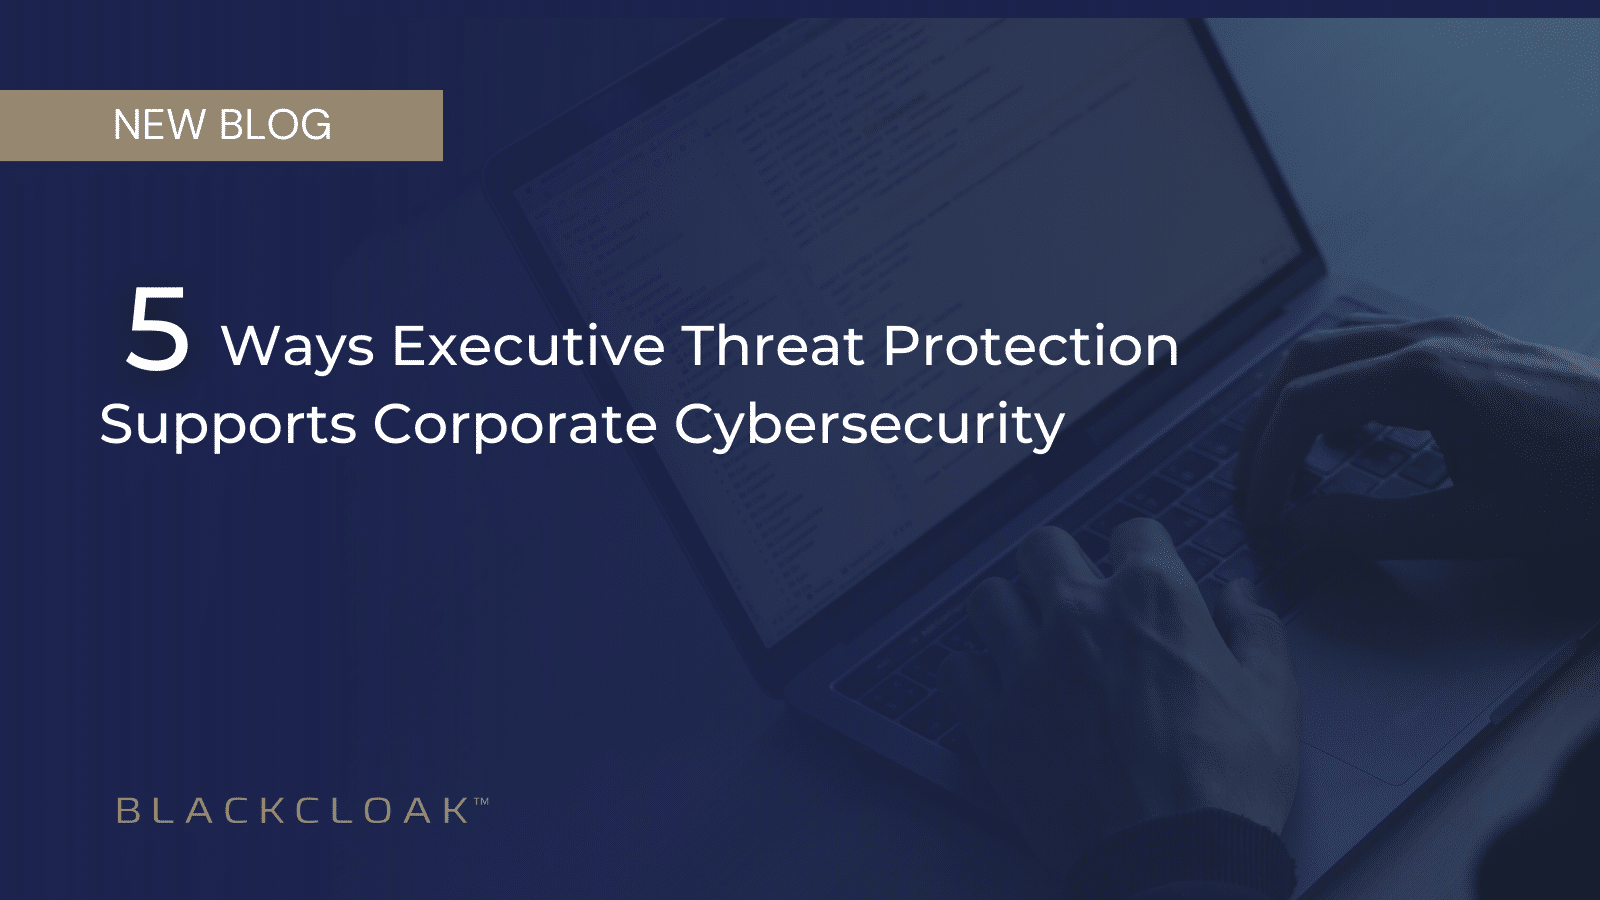 5 Ways Executive Threat Protection Supports Corporate Cybersecurity